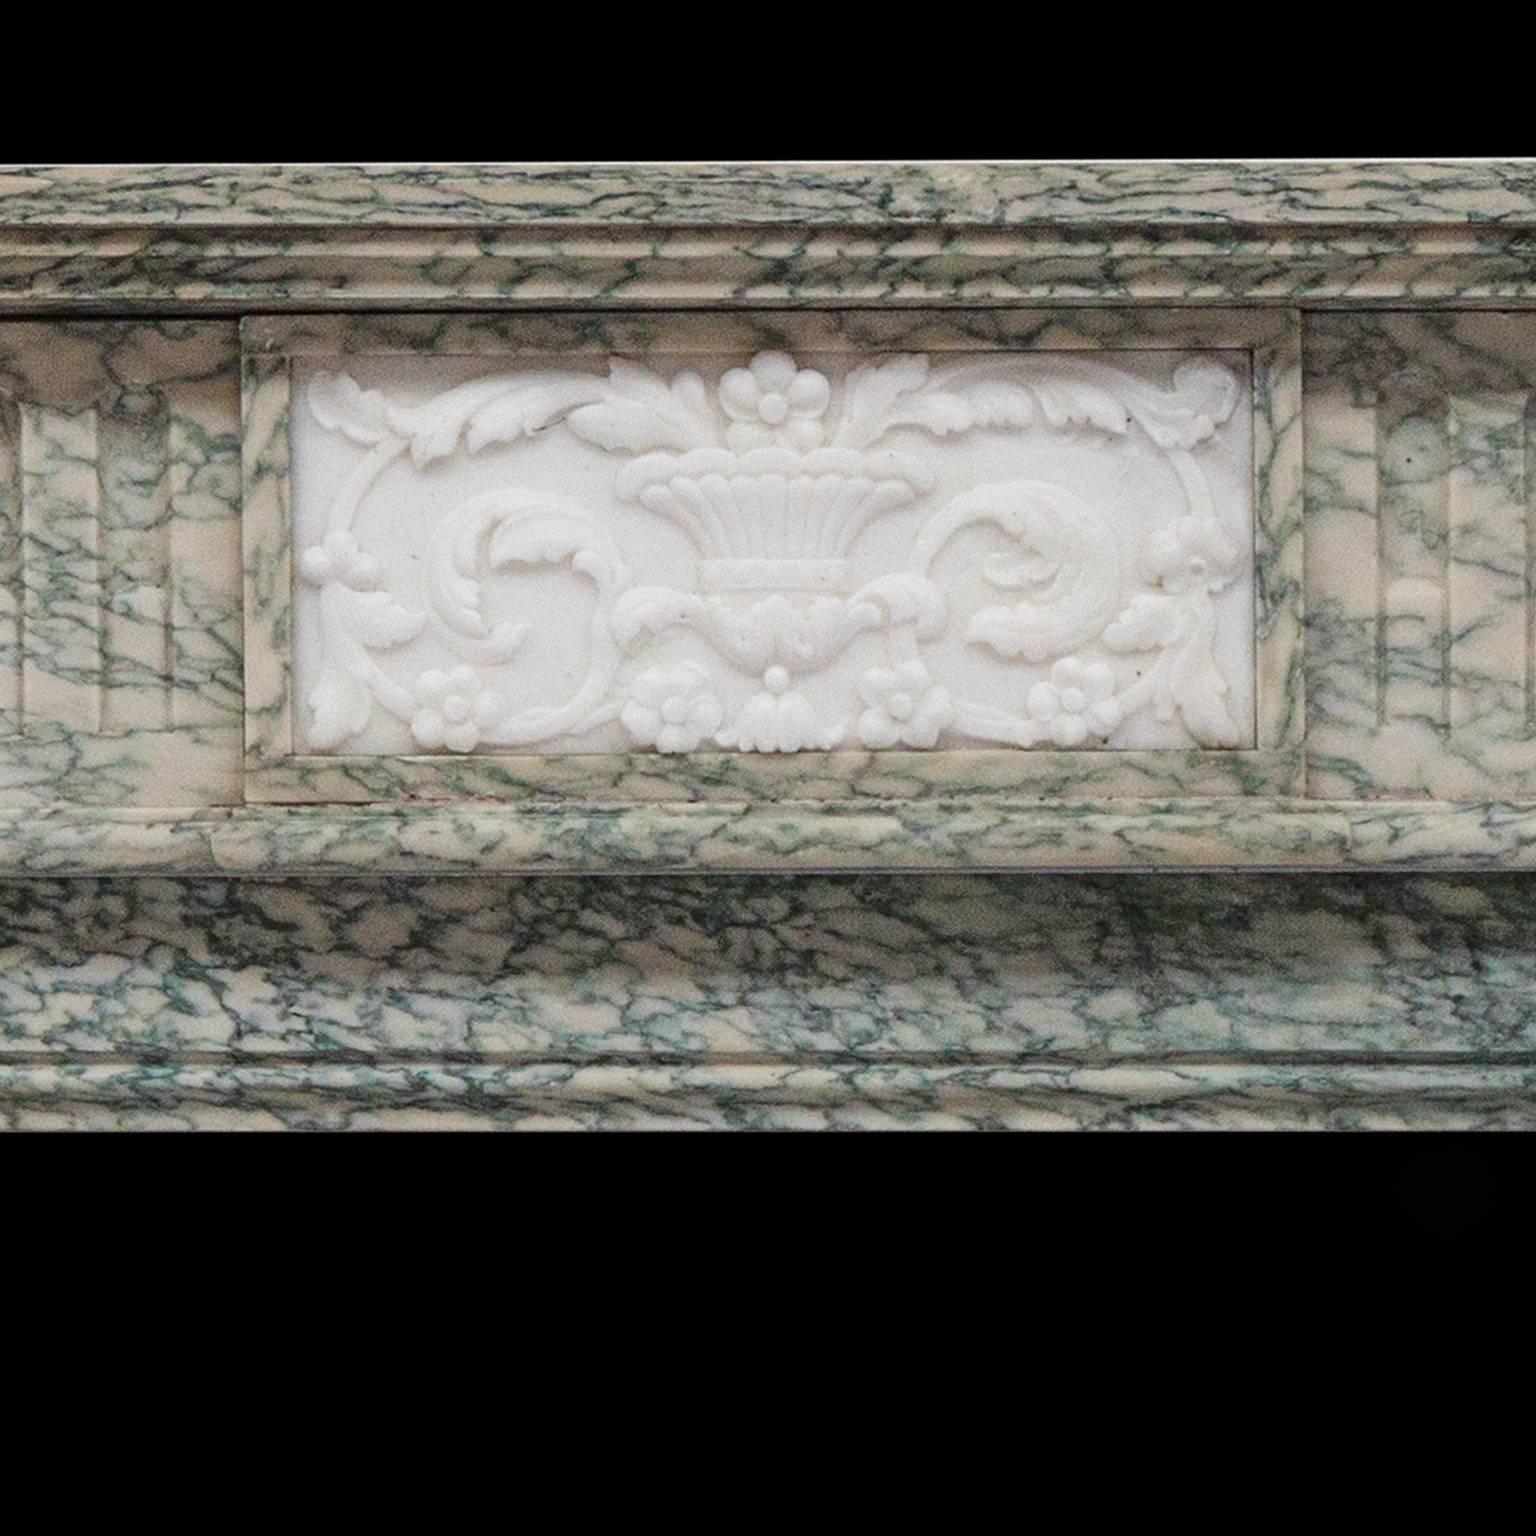 Hand-Carved 19th Century Neoclassical Louis XVI Fireplace Mantel In Campam Vert Marble